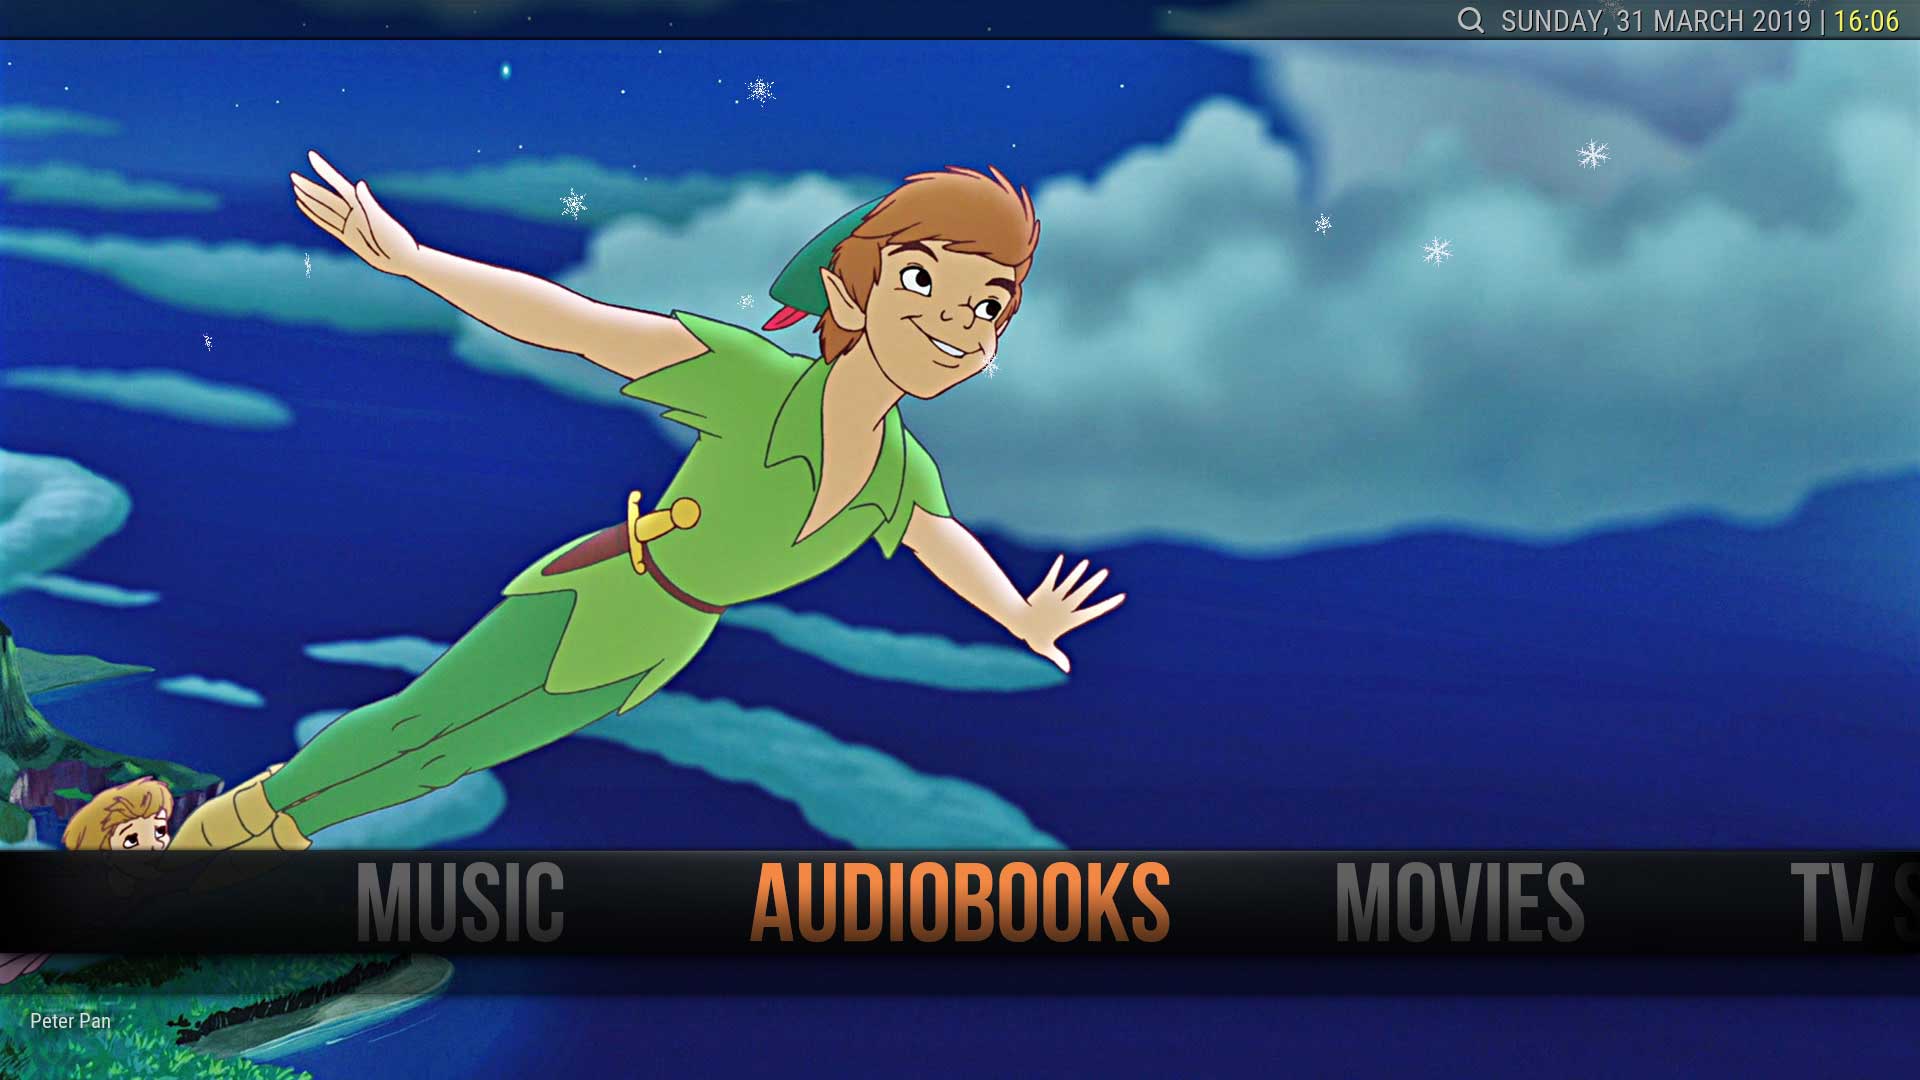 Image 2- Audiobooks separated from traditional Music